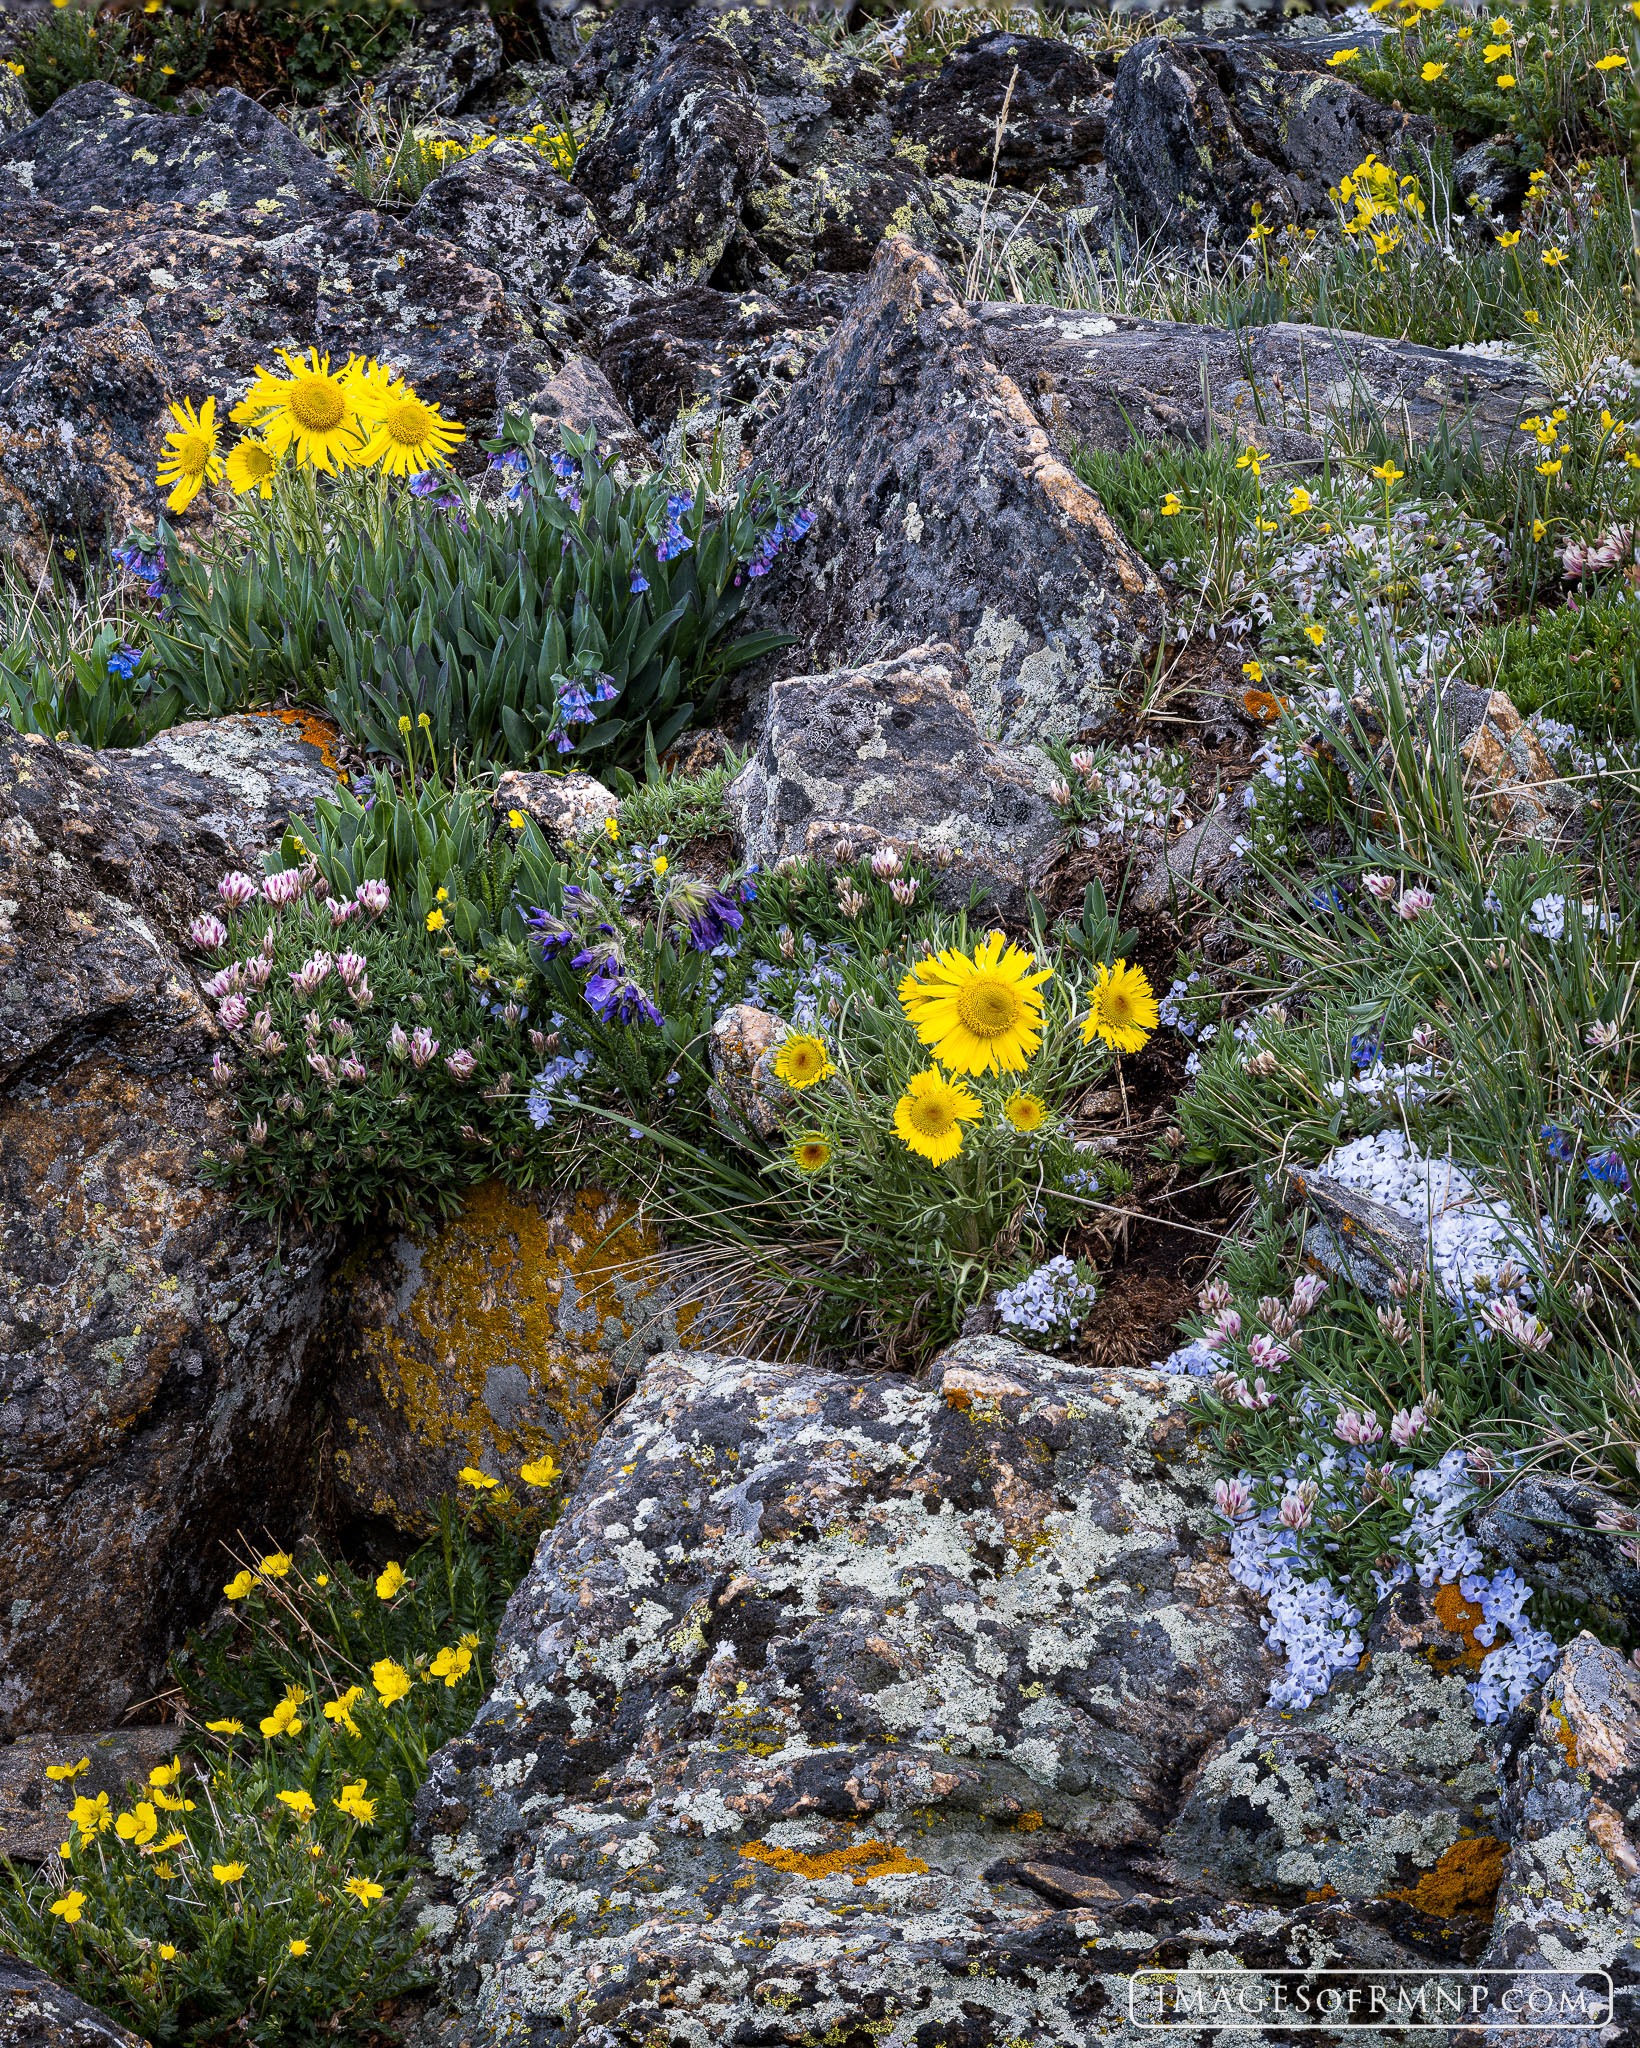 High in the alpine tundra of Rocky Mountain National Park you'll find small rock gardens hidden away and overflowing with color...